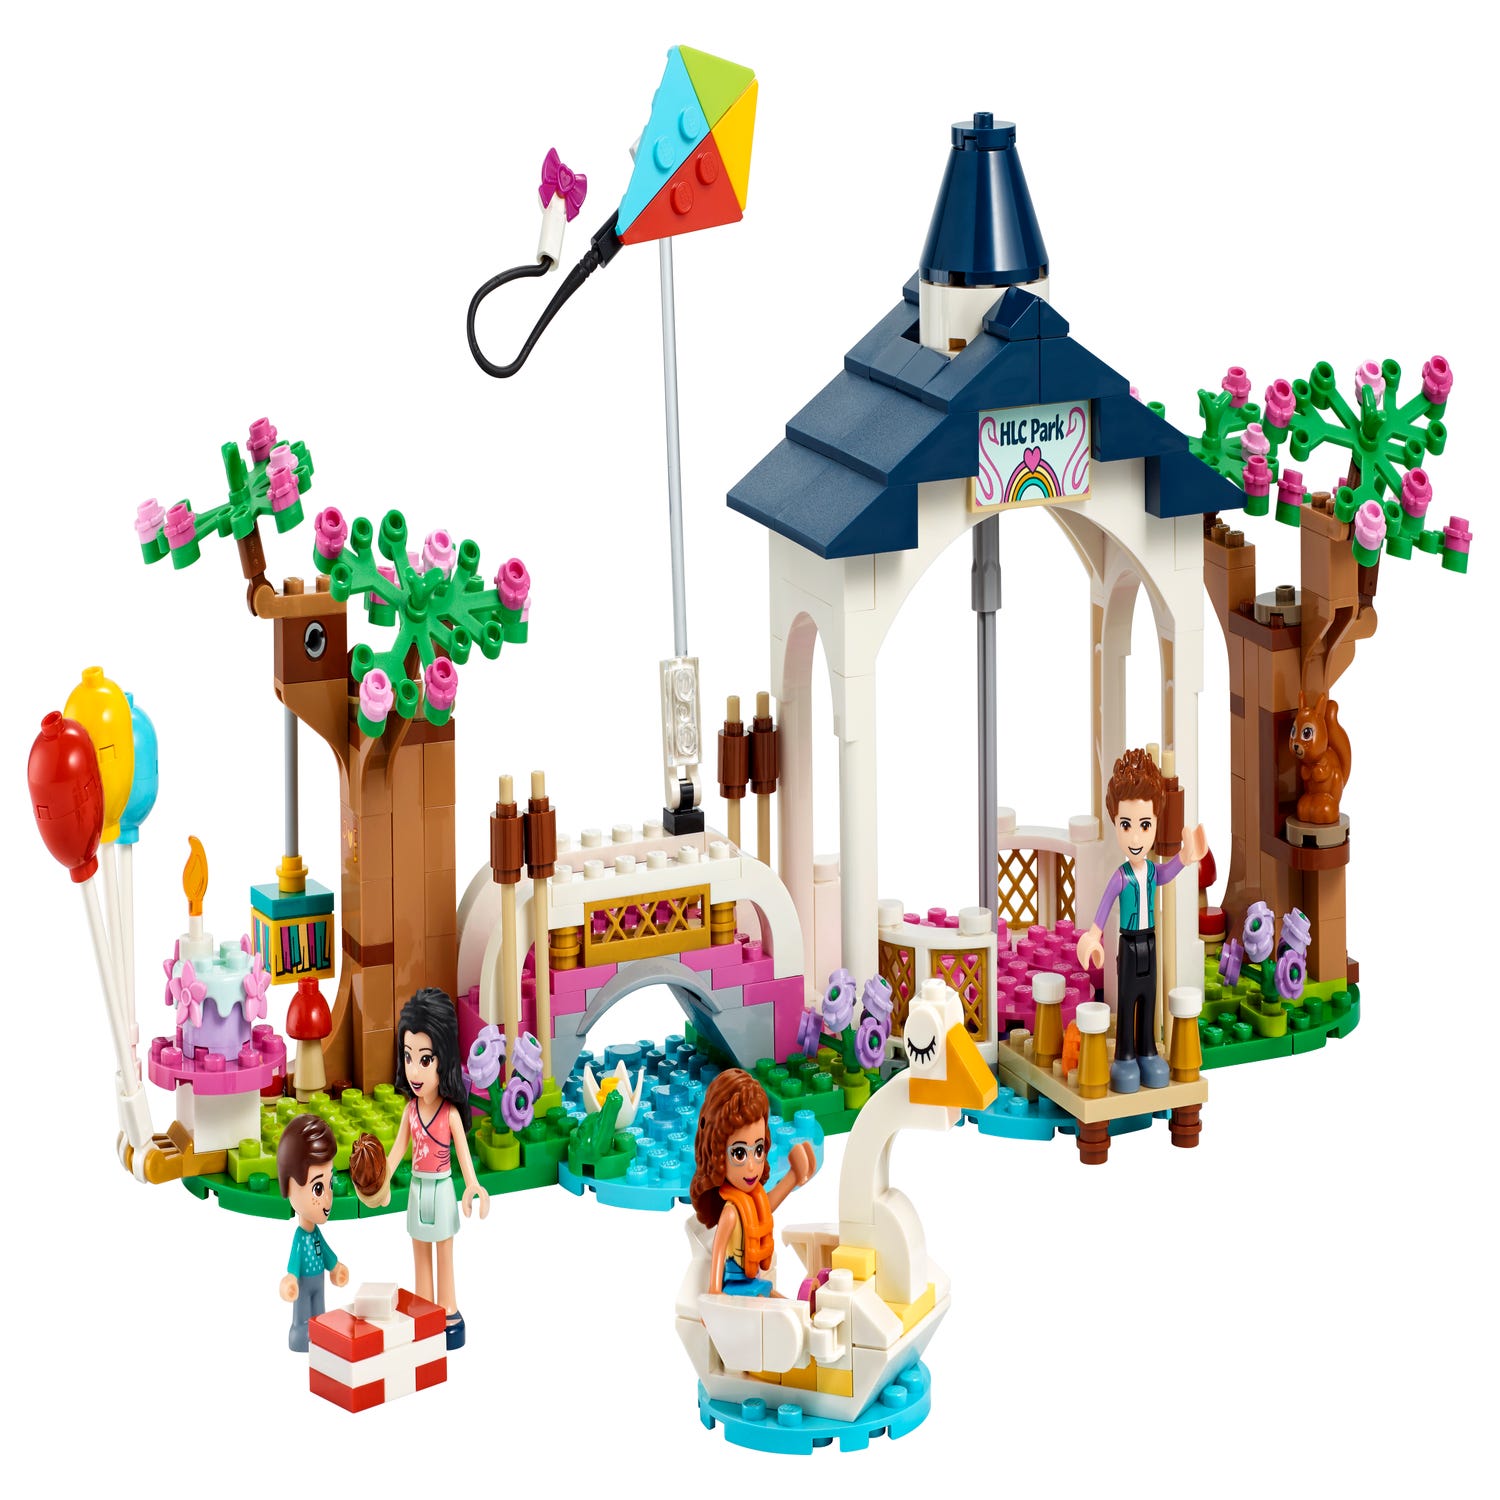 Heartlake City Park 41447 | Friends Buy online at Official LEGO® US